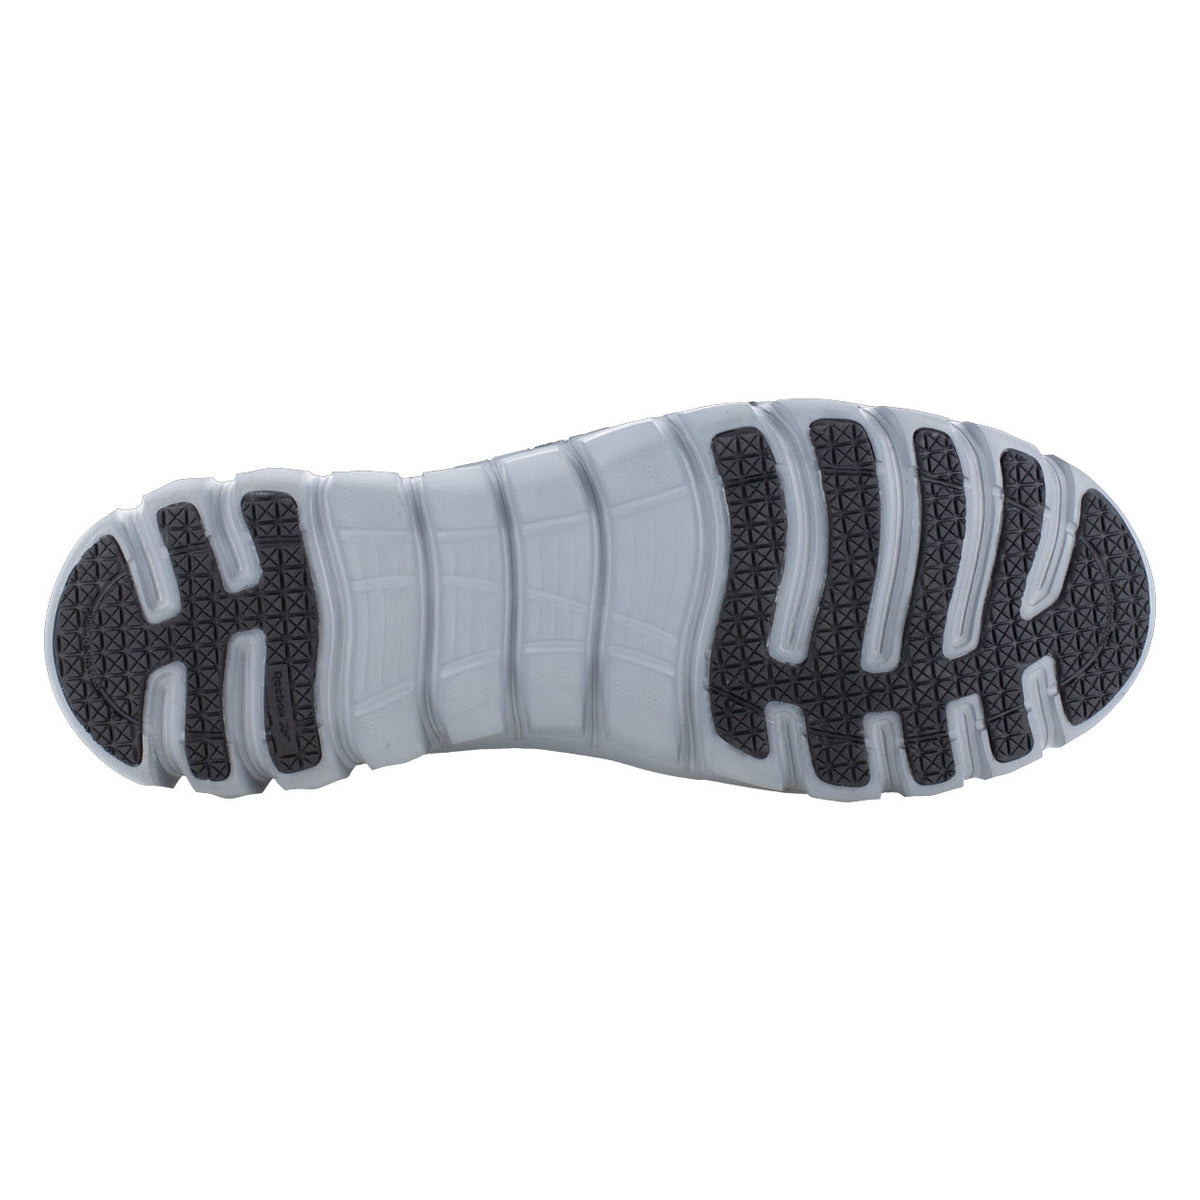 Bottom view of a Reebok Work shoe sole displaying a detailed tread pattern with alternating black and white sections on a MemoryTech Massage footbed.